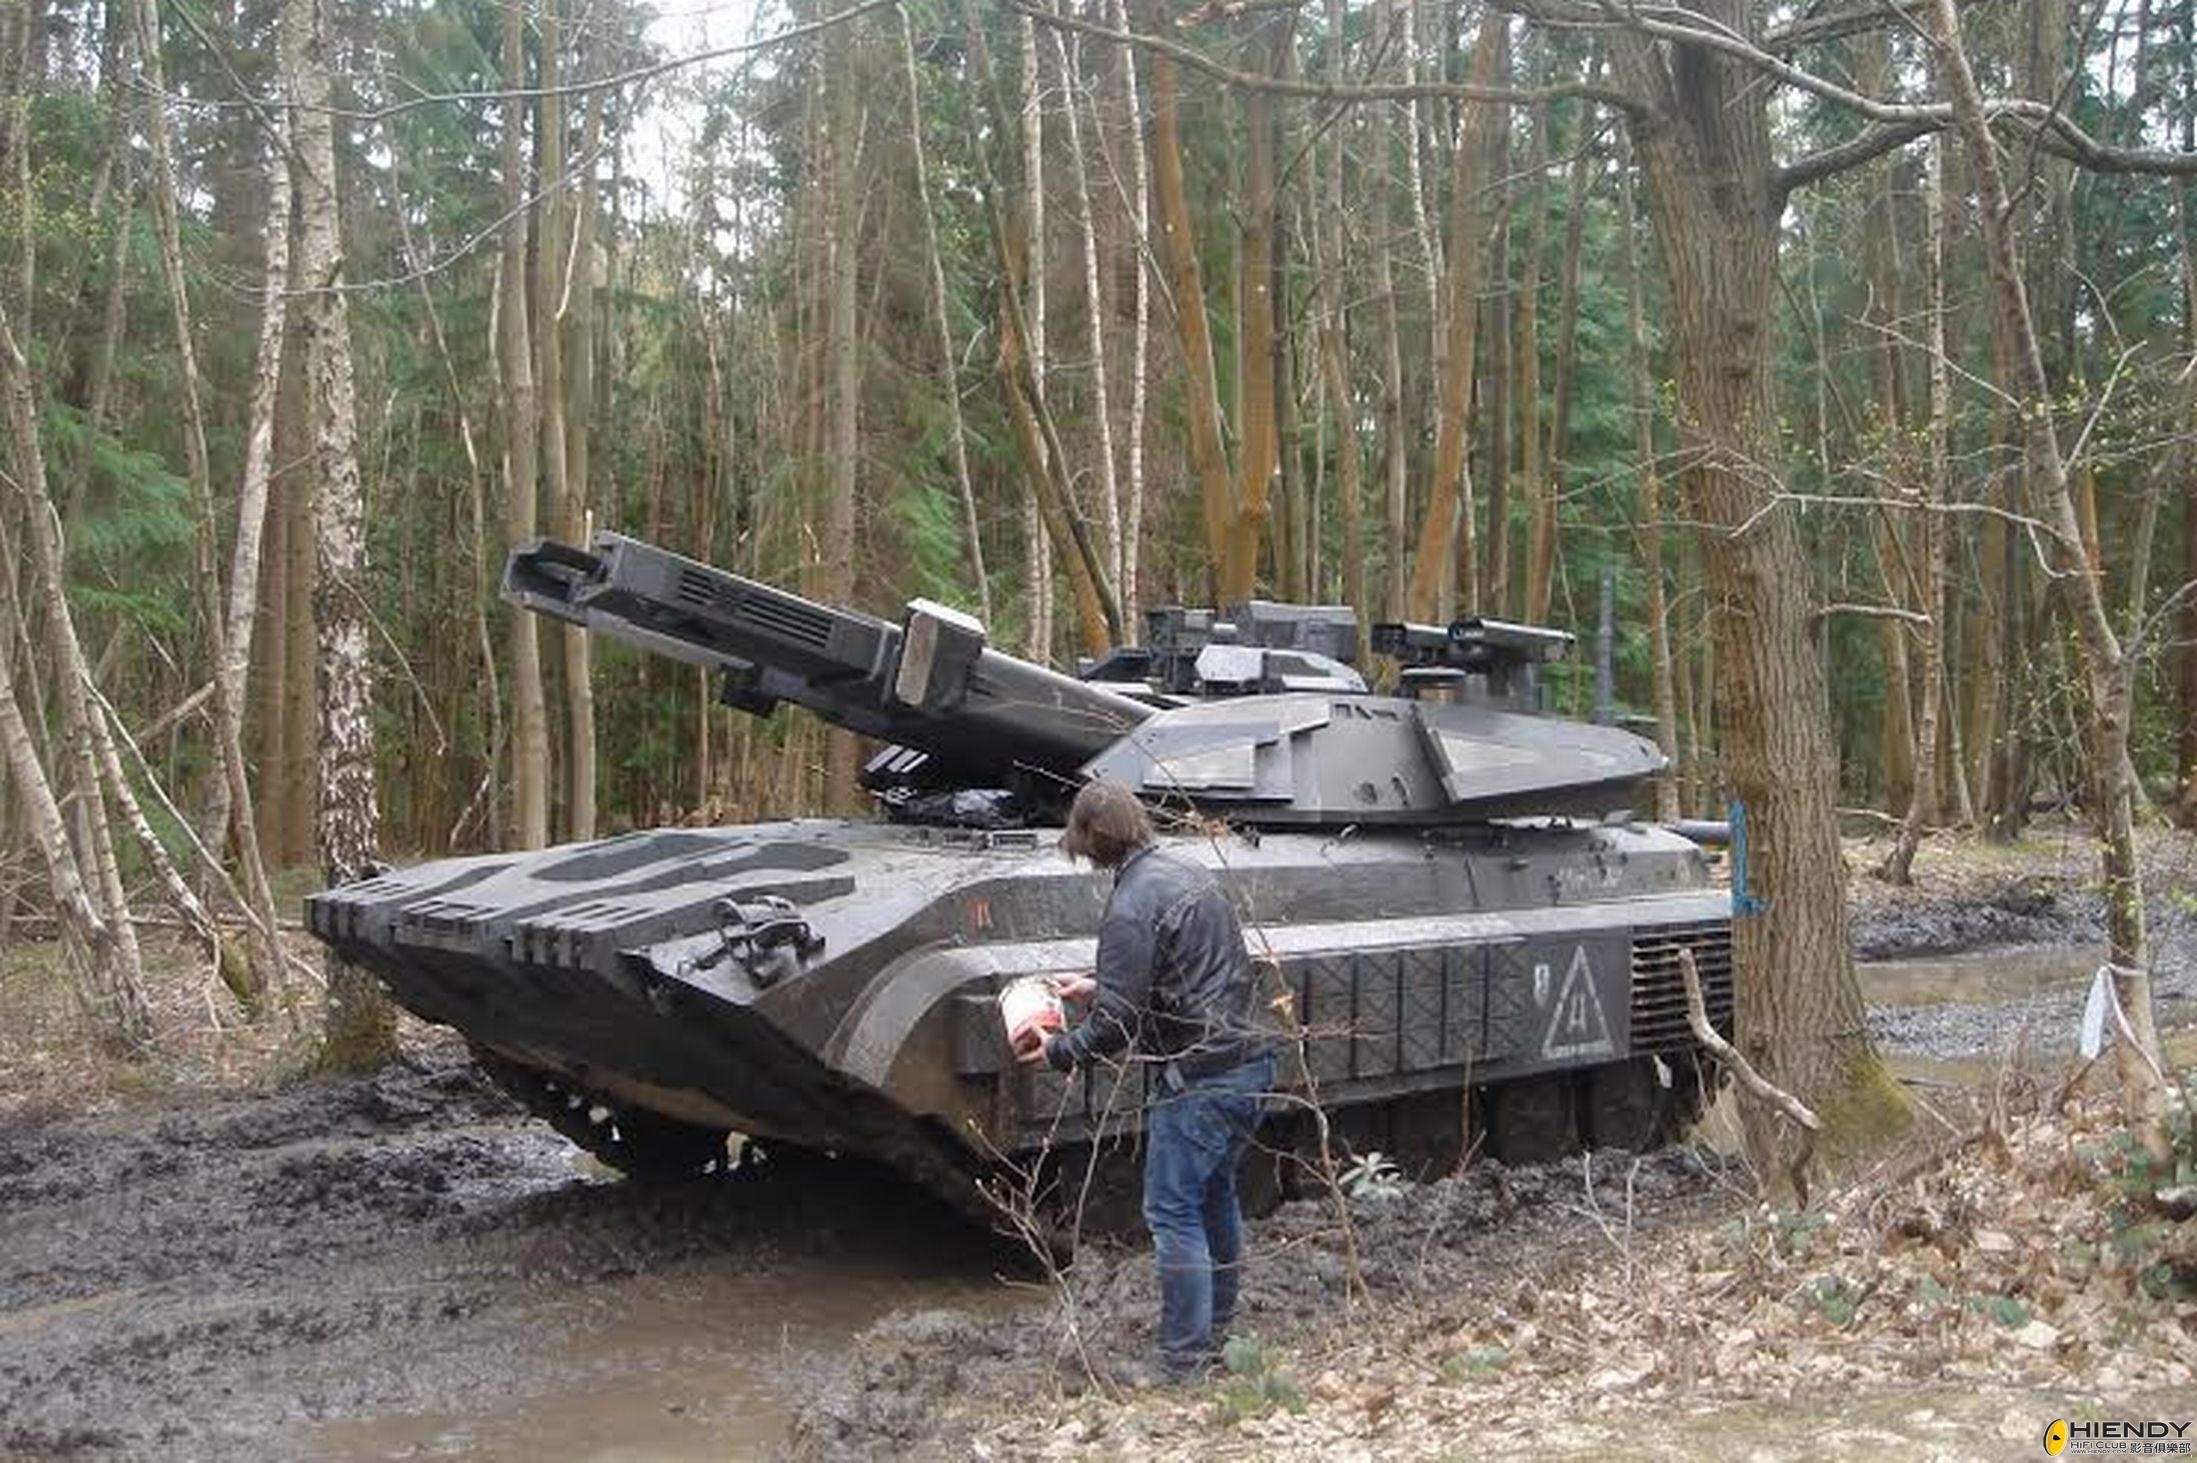 Avengers-filming-in-Hampshire-woods-3395320.jpg